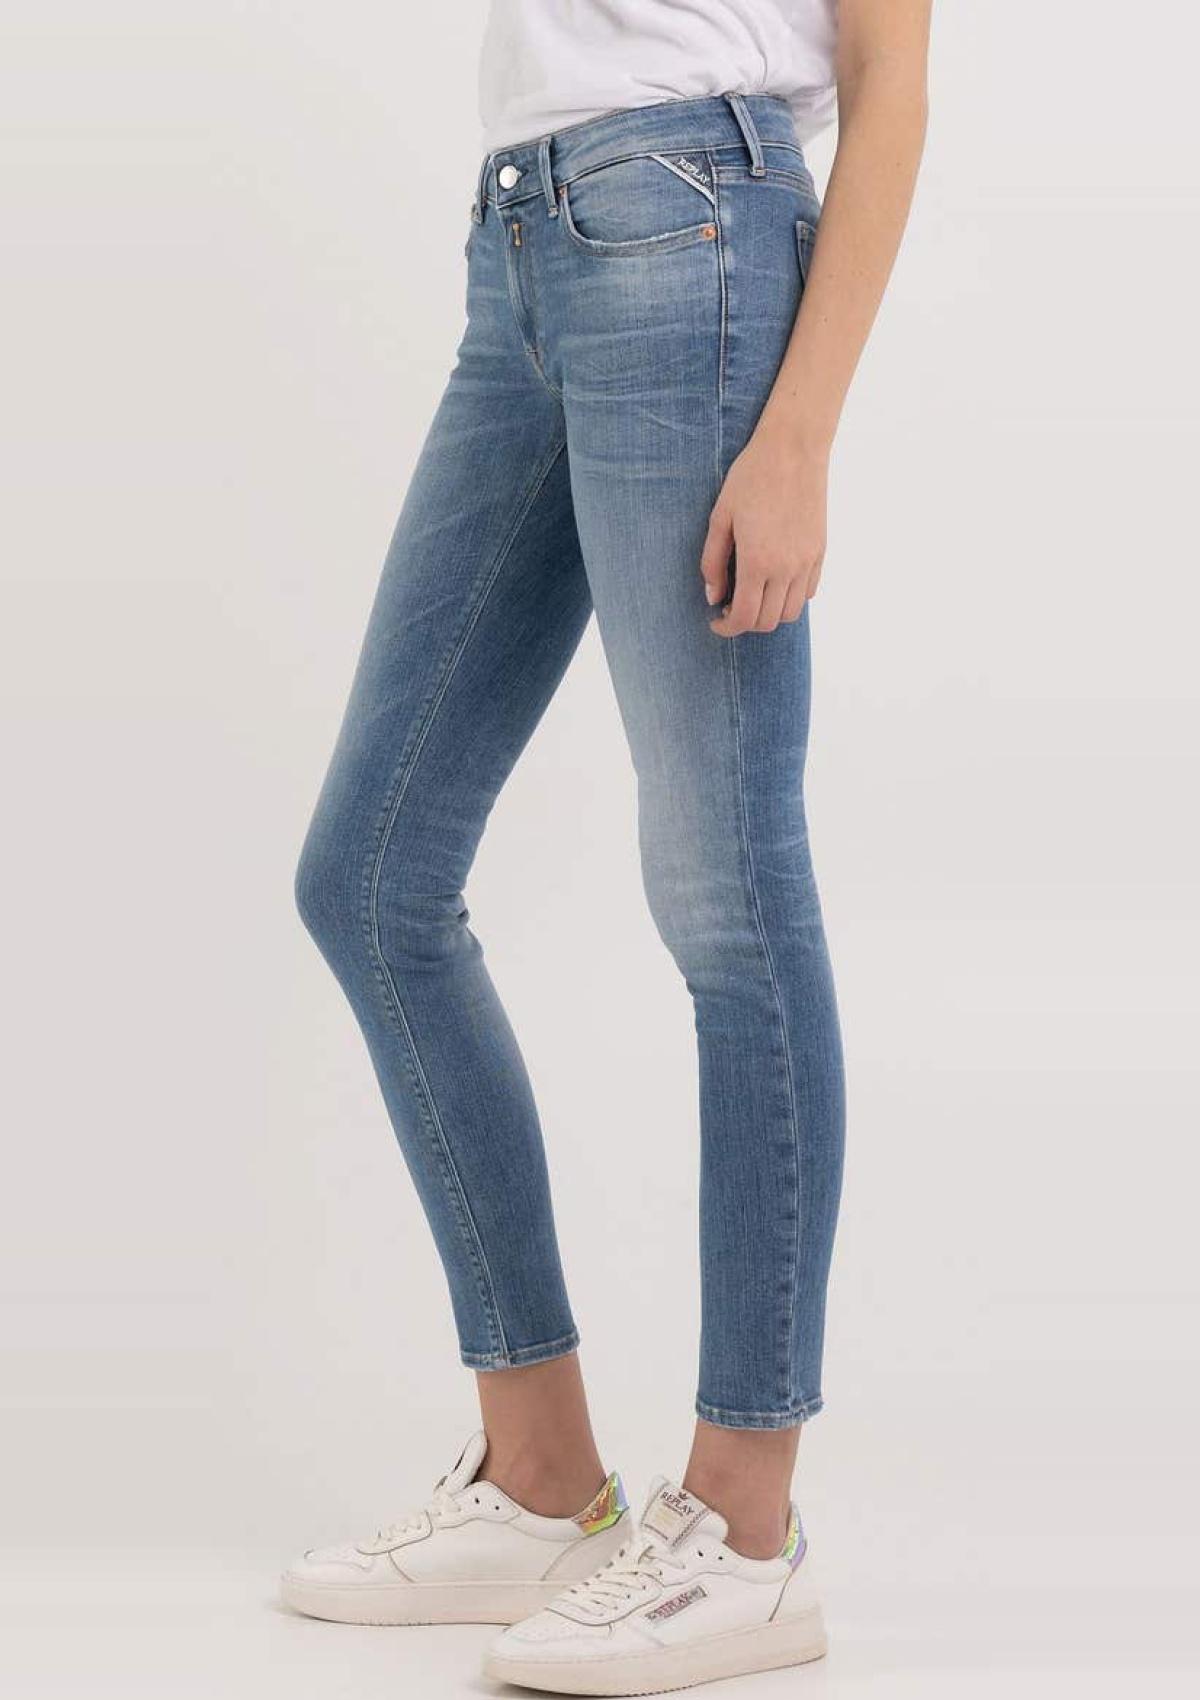 Replay Jeans WH689-69D 521-009 009 | NEW LUZ